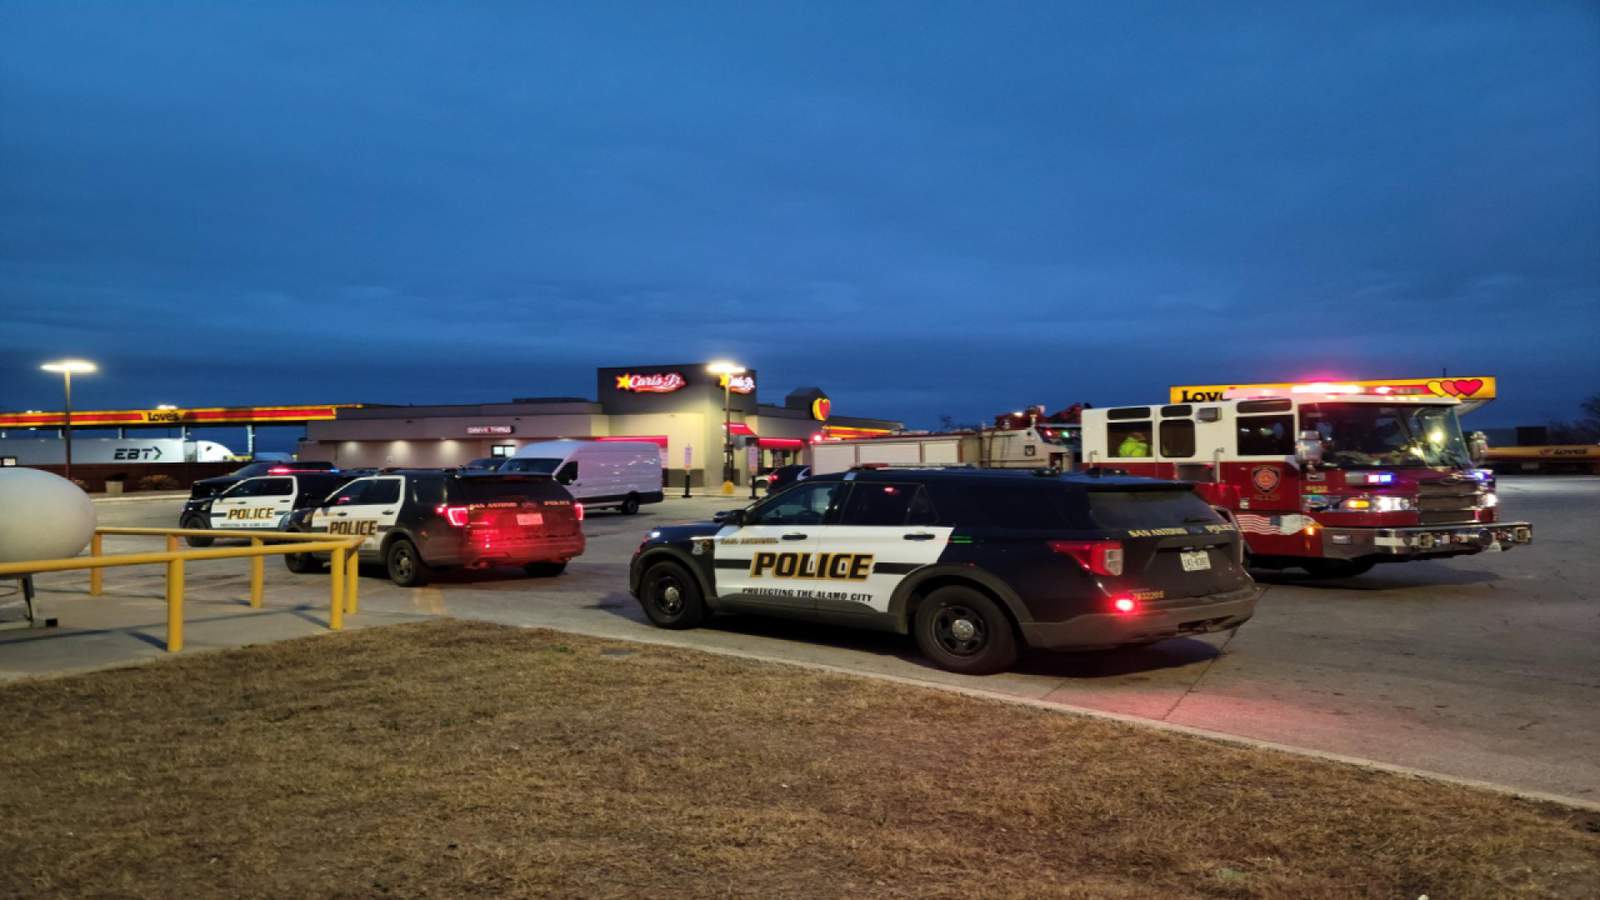 Man stabbed in chest at Southwest Side truck stop, police say